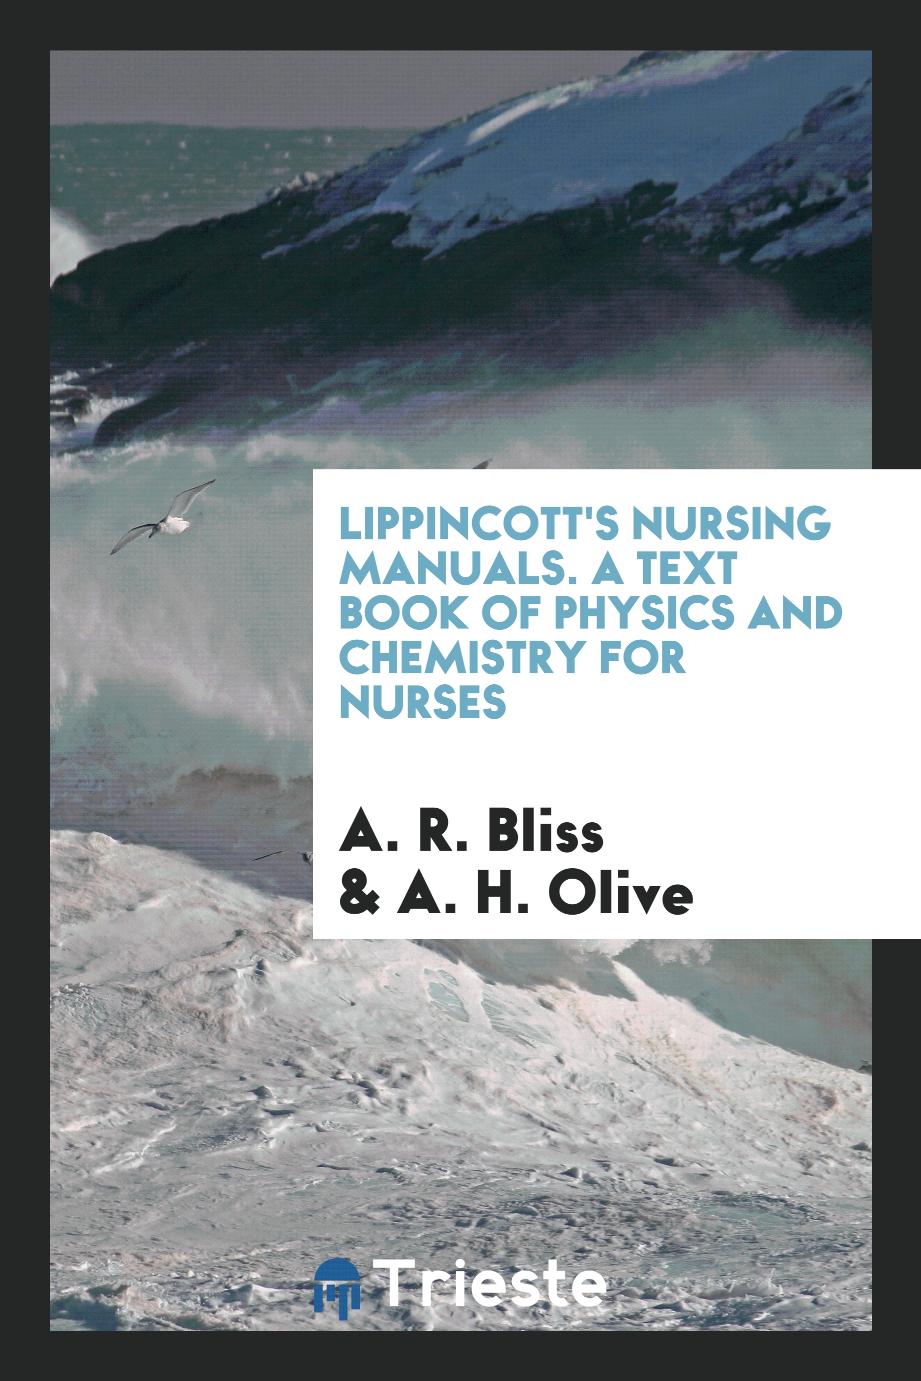 Lippincott's nursing manuals. A text book of physics and chemistry for nurses